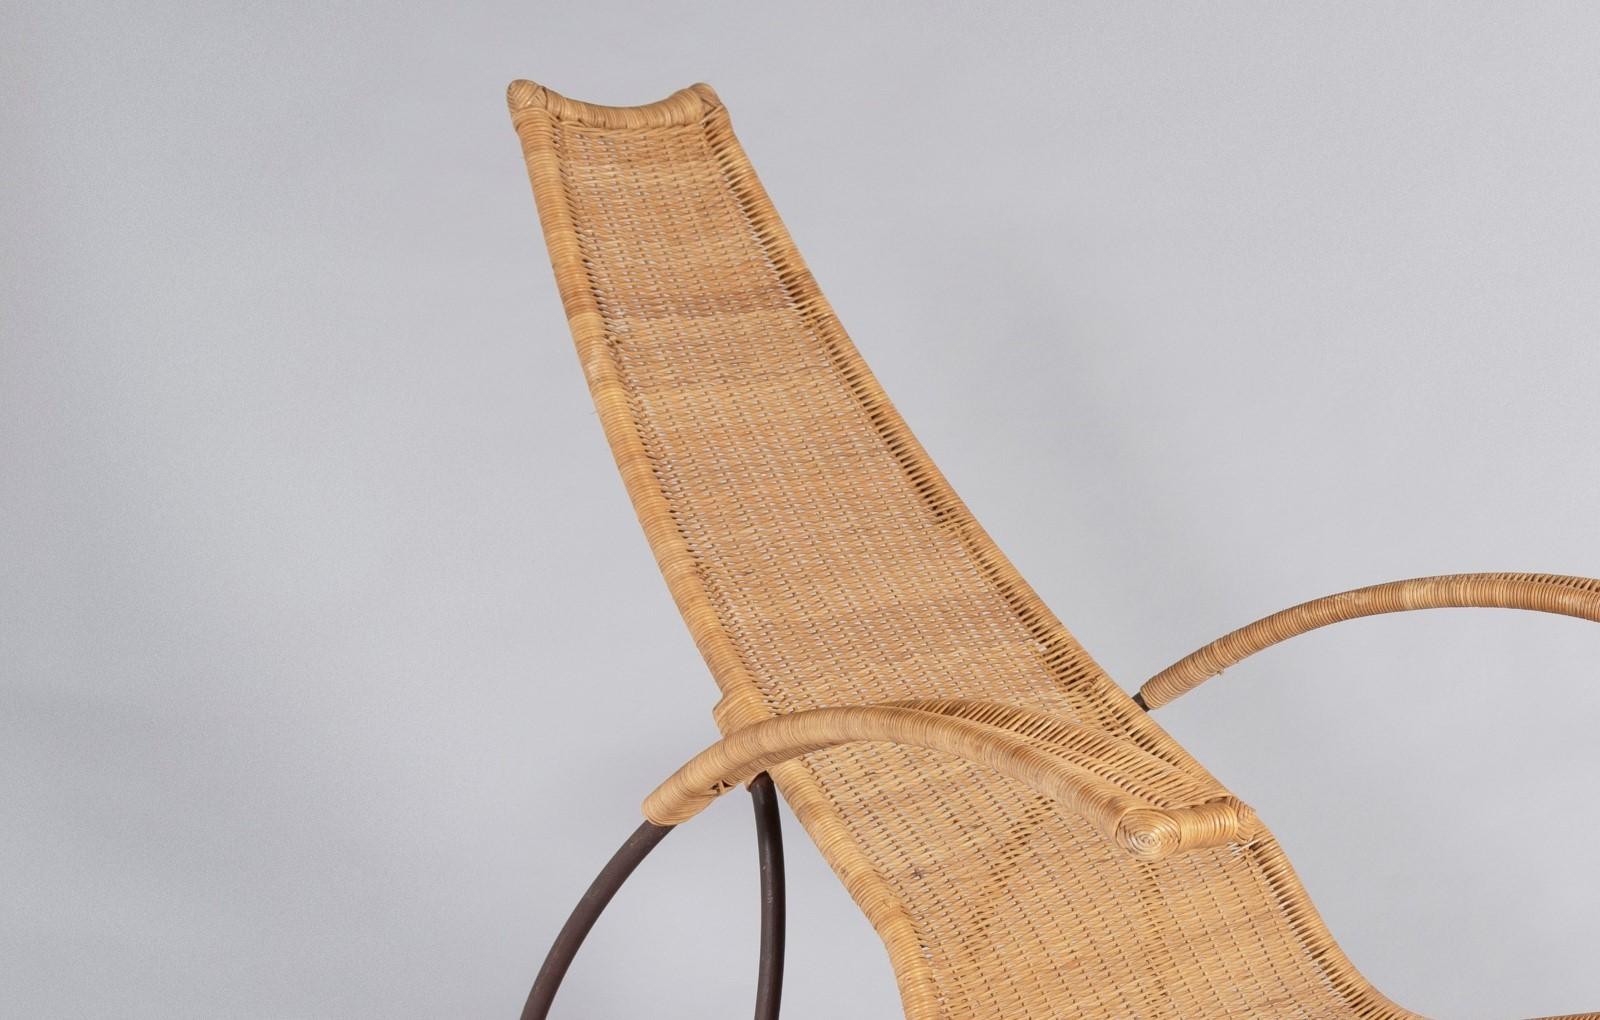 1930s Modernist Wrought Iron Frame Wicker Sun Longer Chaise with Arms + Footrest For Sale 5